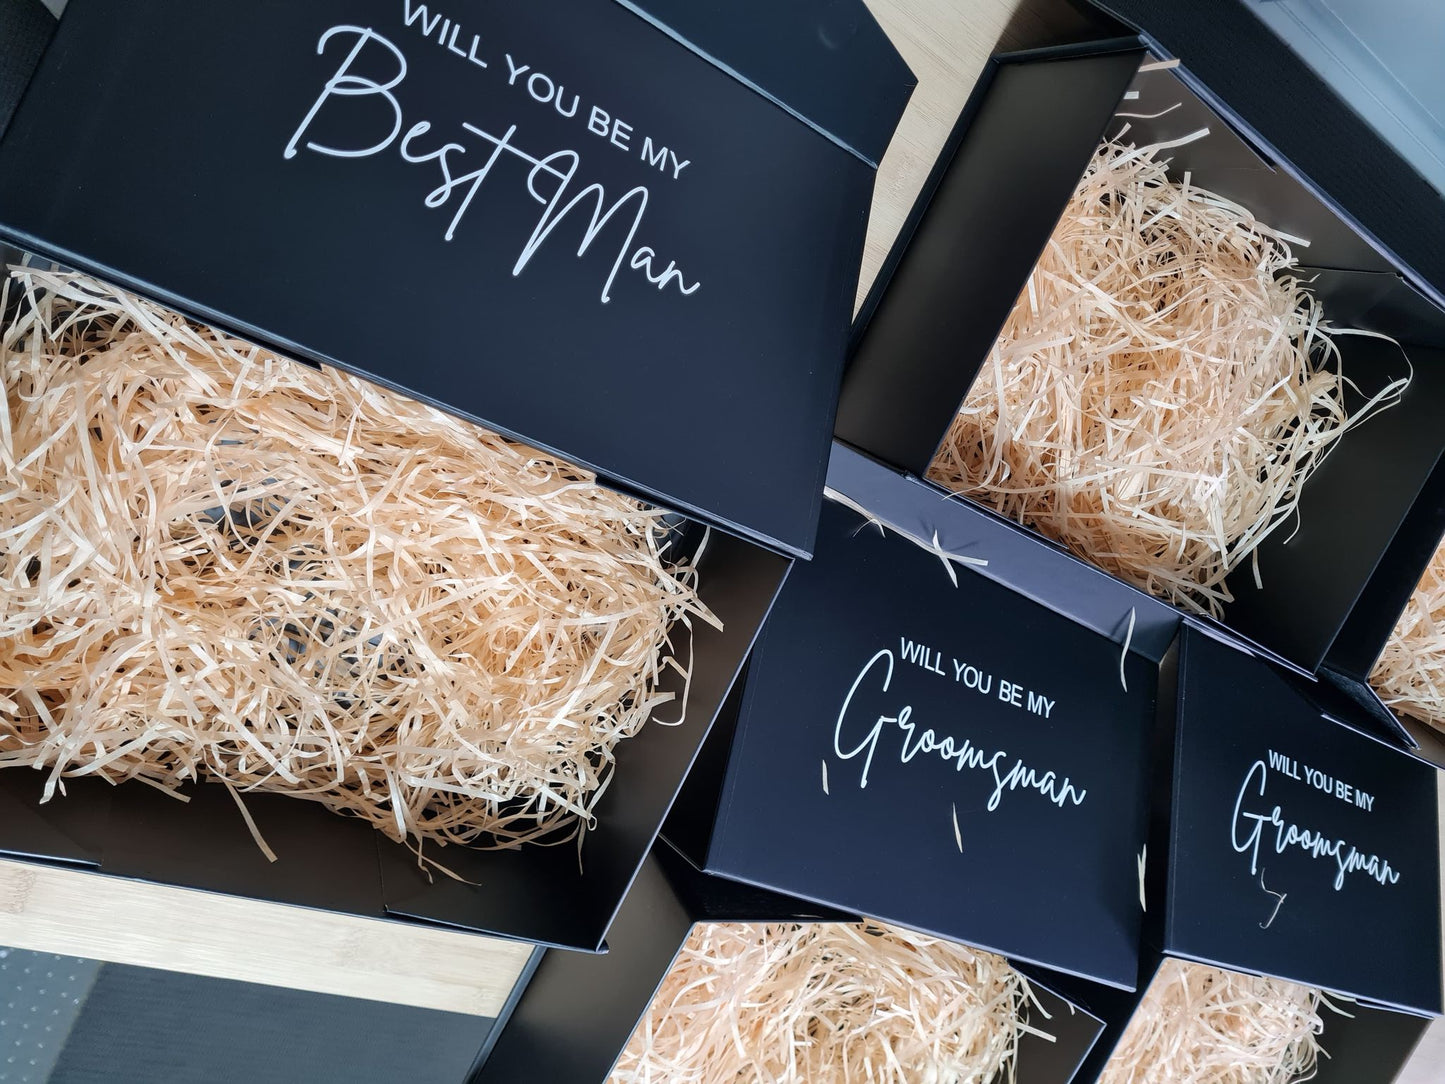 Magnetic gift box - Will you be my?